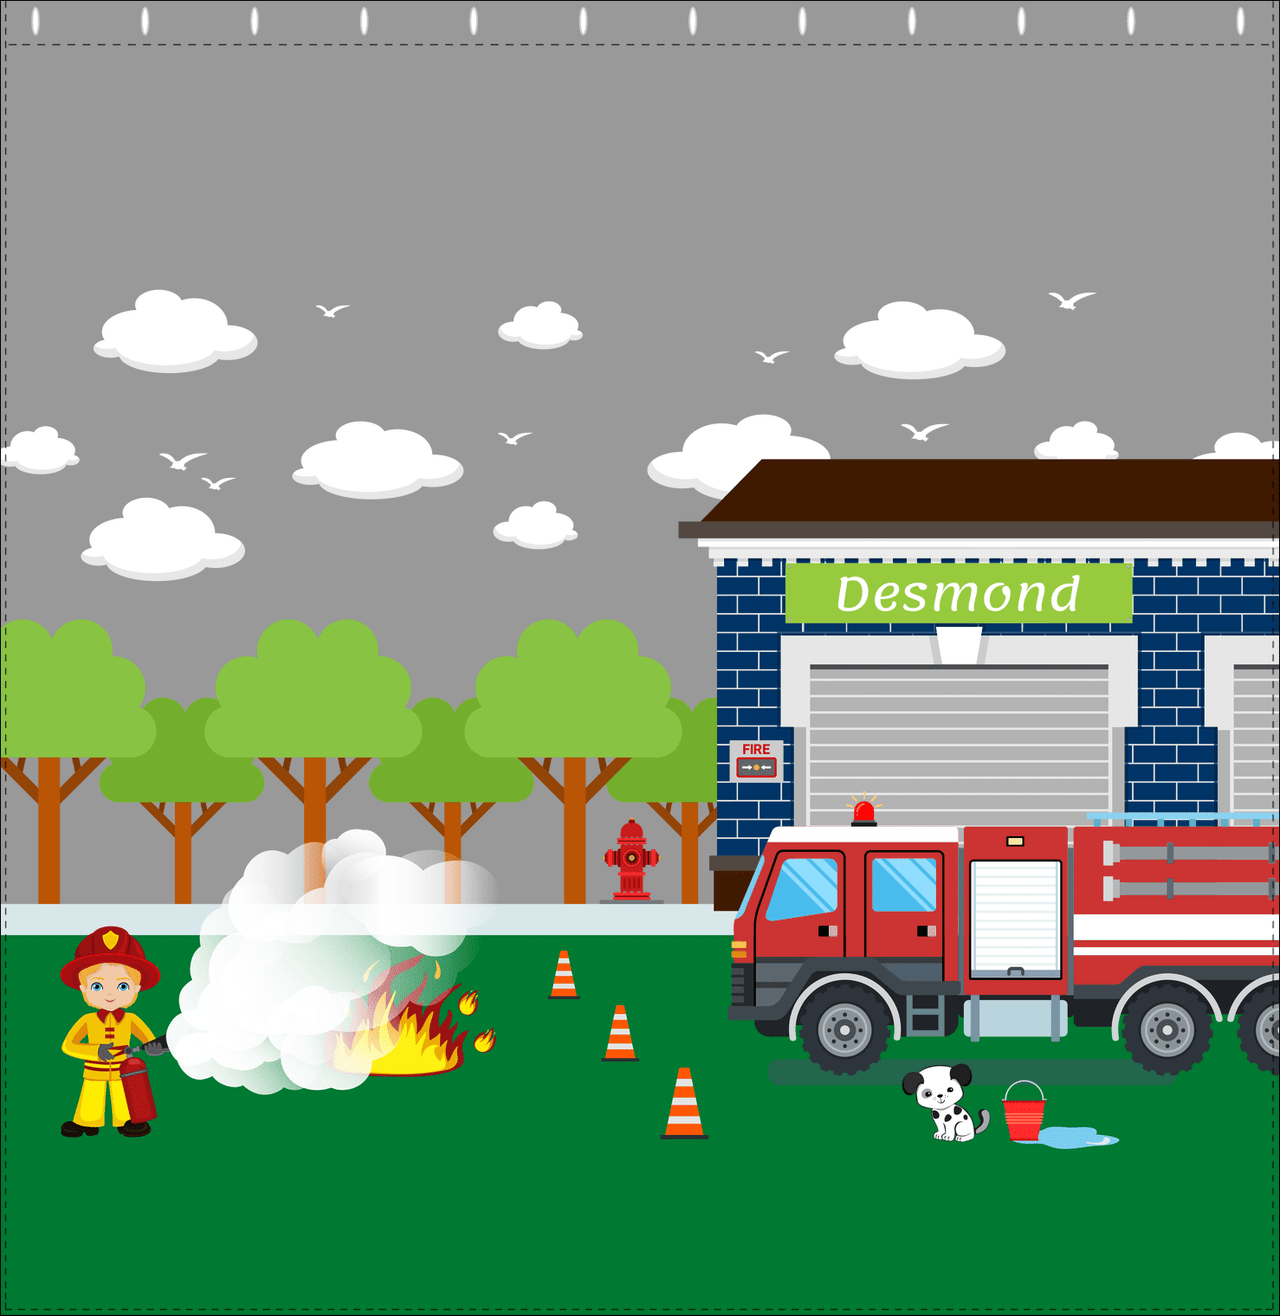 Personalized Fire Truck Shower Curtain VI - Grey Background - Blond Boy - Decorate View